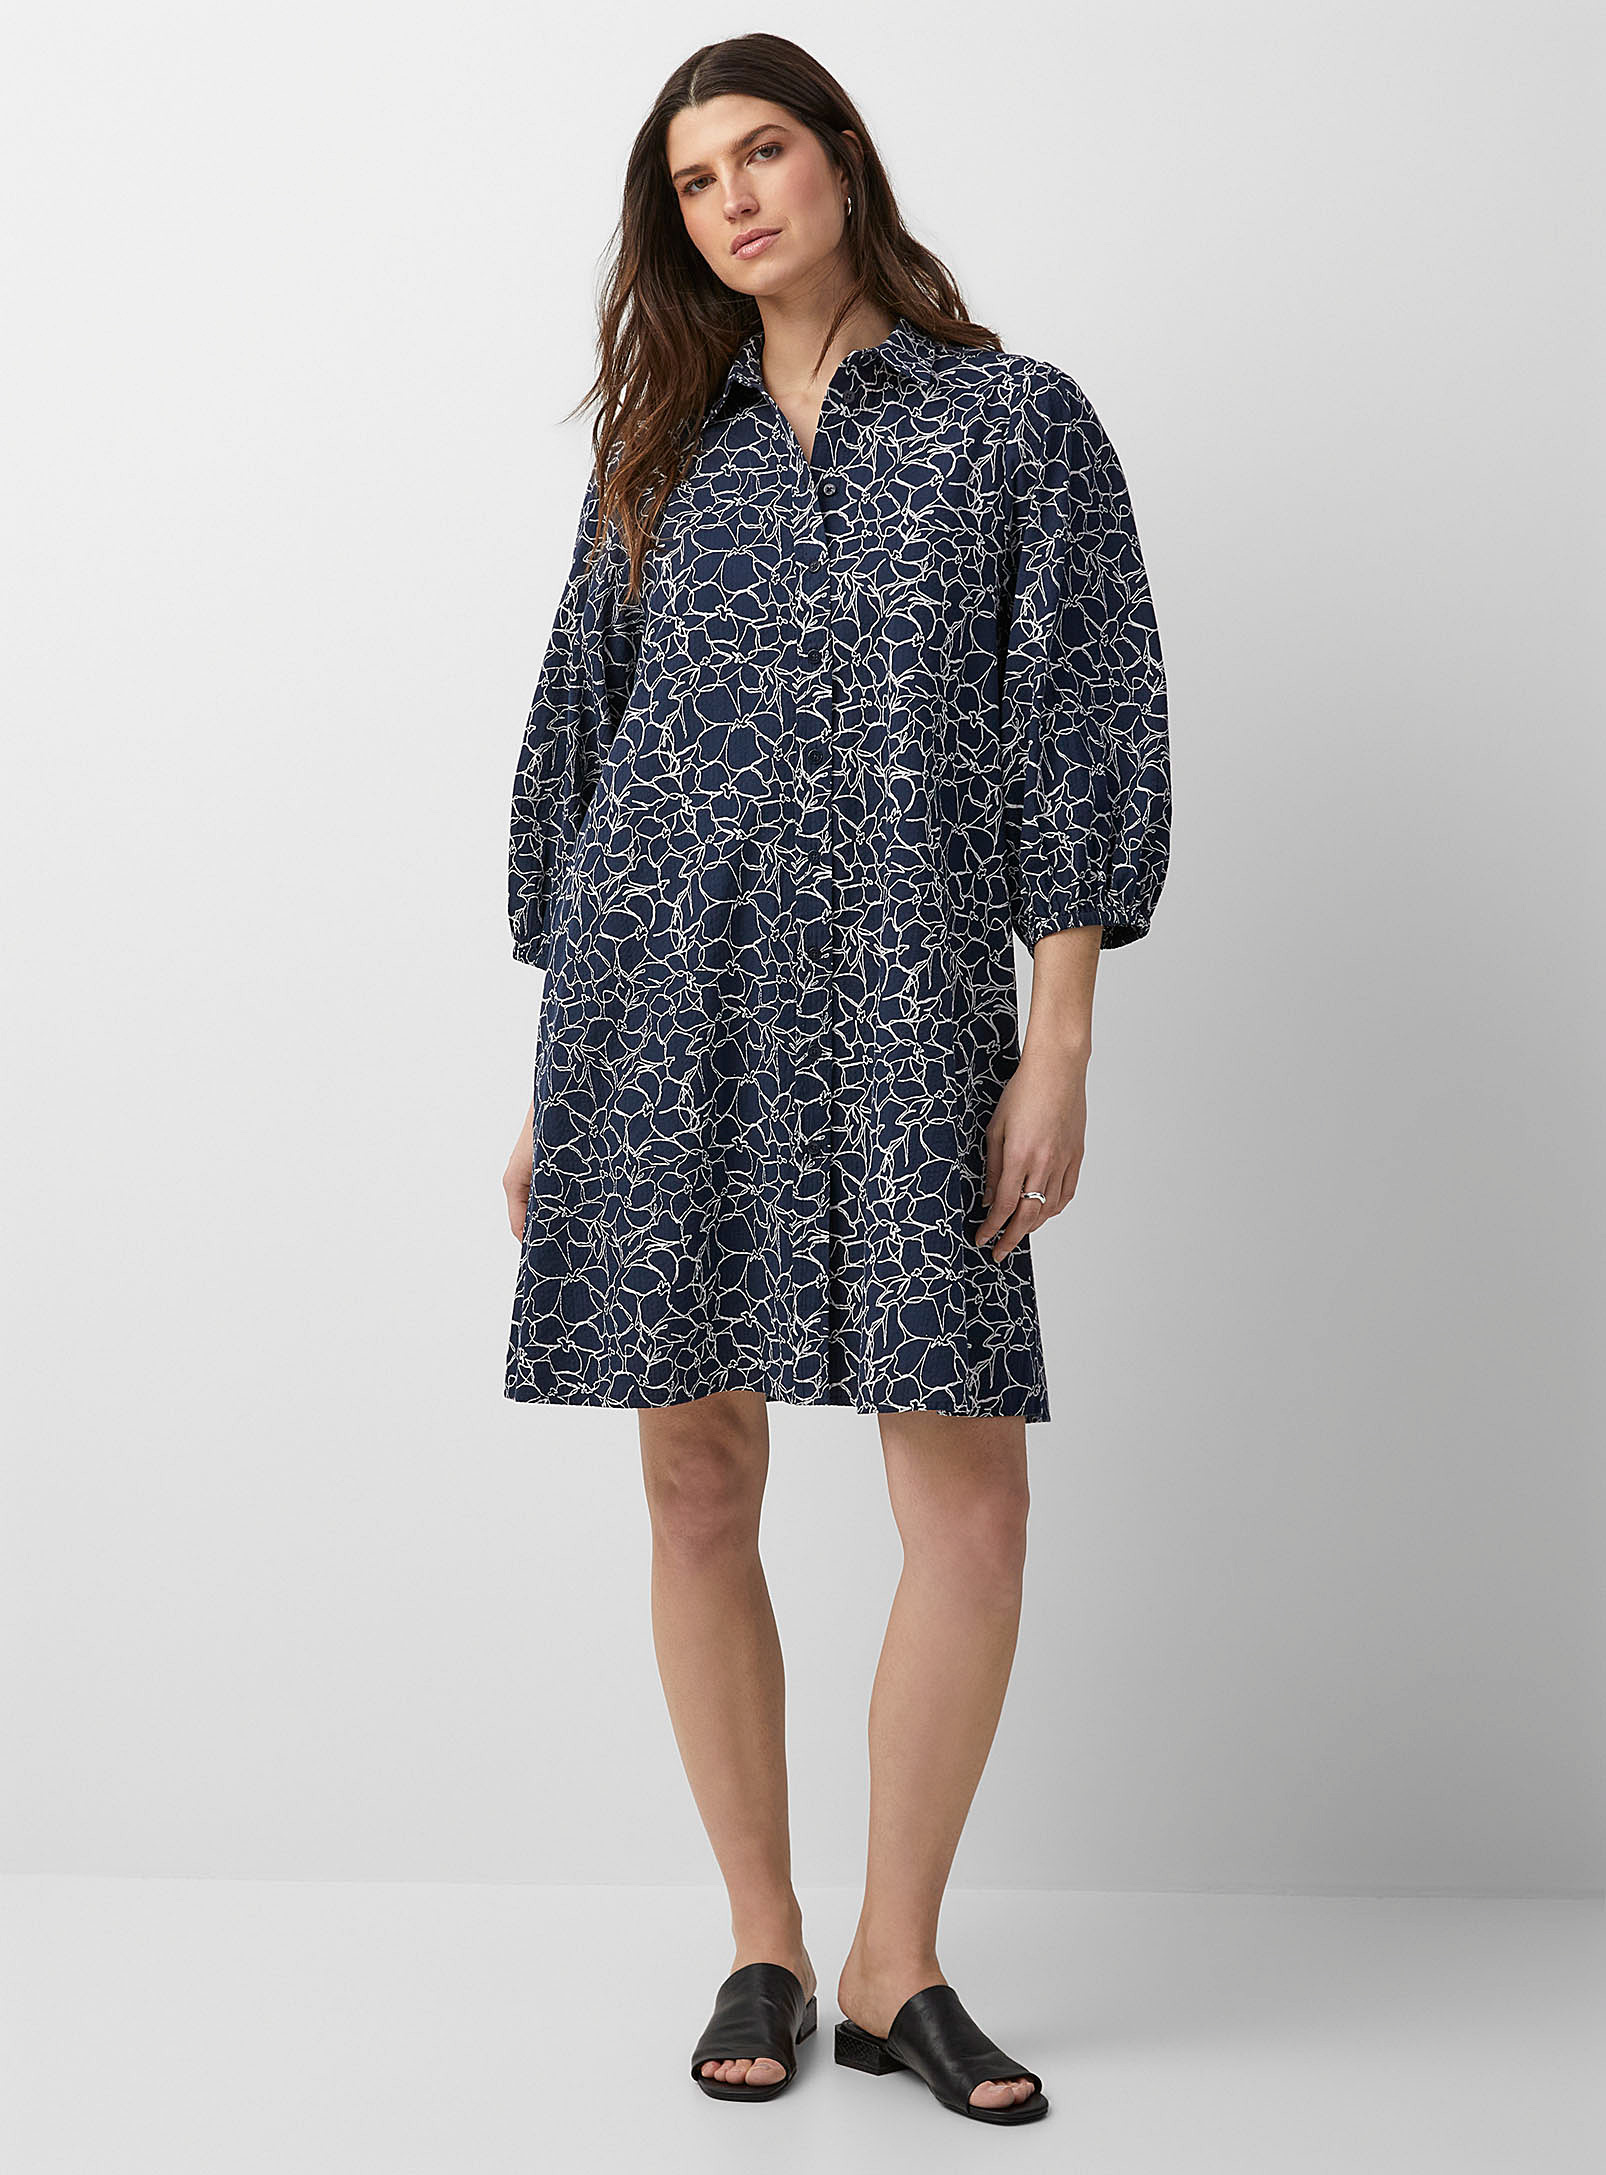 Contemporaine Floral Sketch Shirtdress In Patterned Black